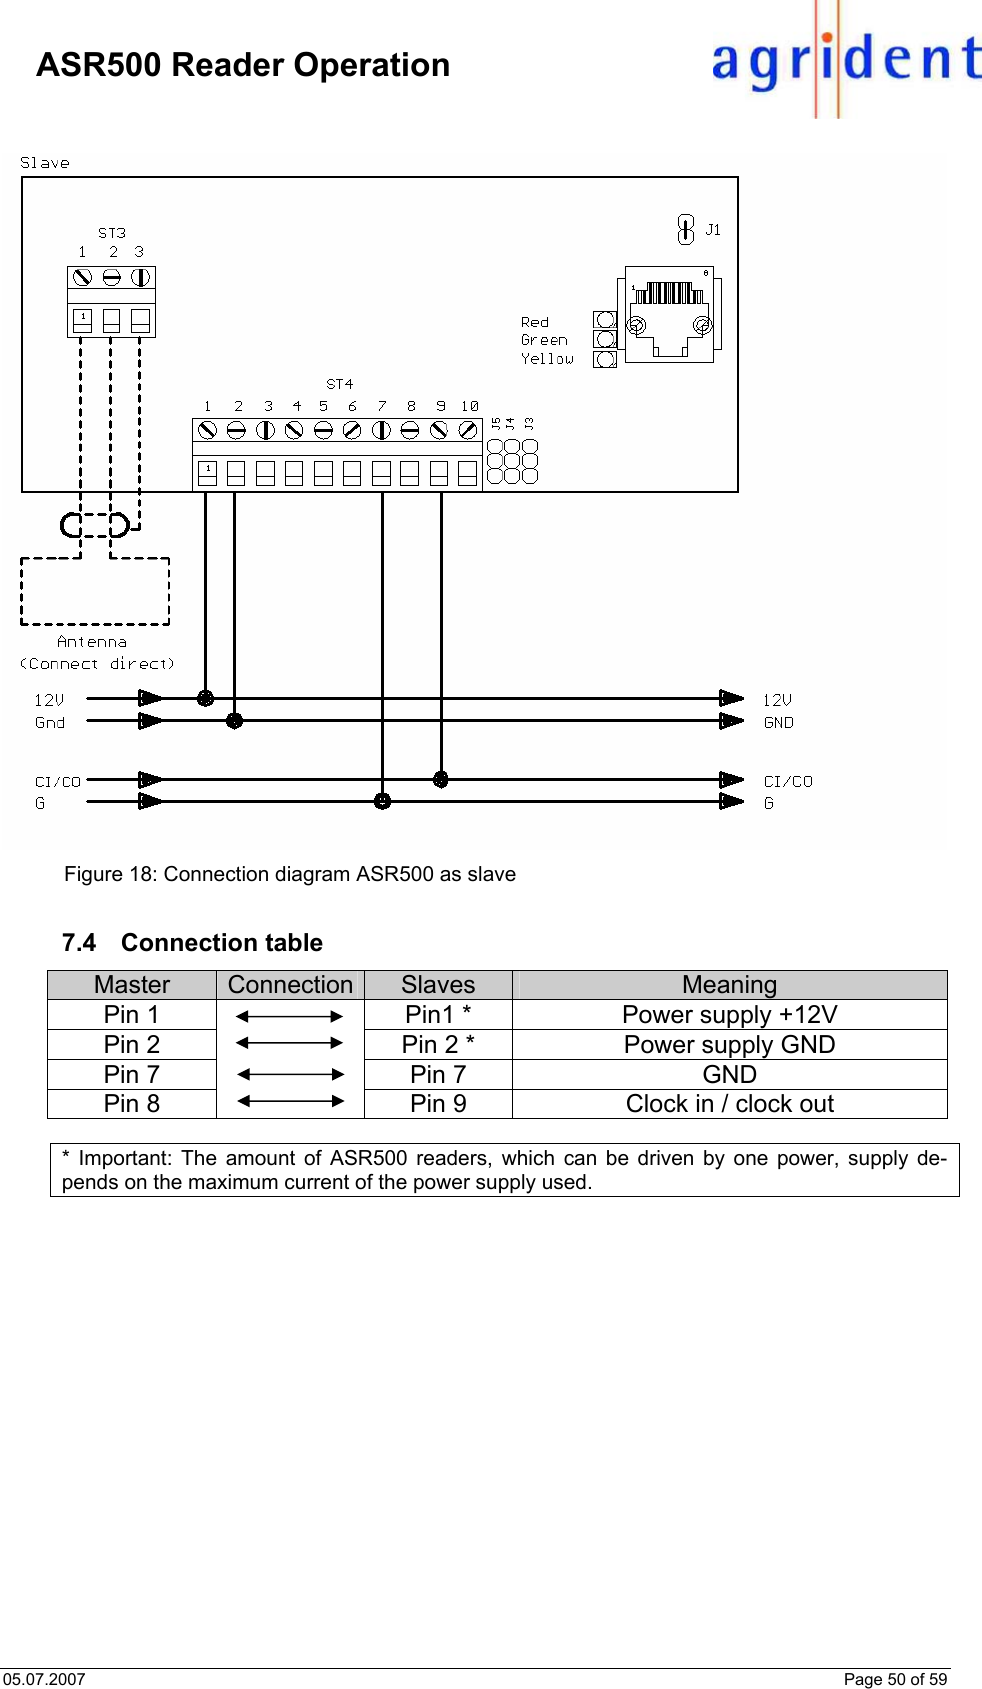 05.07.2007    Page 50 of 59     ASR500 Reader Operation   Figure 18: Connection diagram ASR500 as slave  7.4 Connection table Master  Connection  Slaves  Meaning Pin 1  Pin1 *  Power supply +12V Pin 2  Pin 2 *  Power supply GND Pin 7  Pin 7  GND Pin 8  Pin 9  Clock in / clock out  * Important: The amount of ASR500 readers, which can be driven by one power, supply de-pends on the maximum current of the power supply used. 